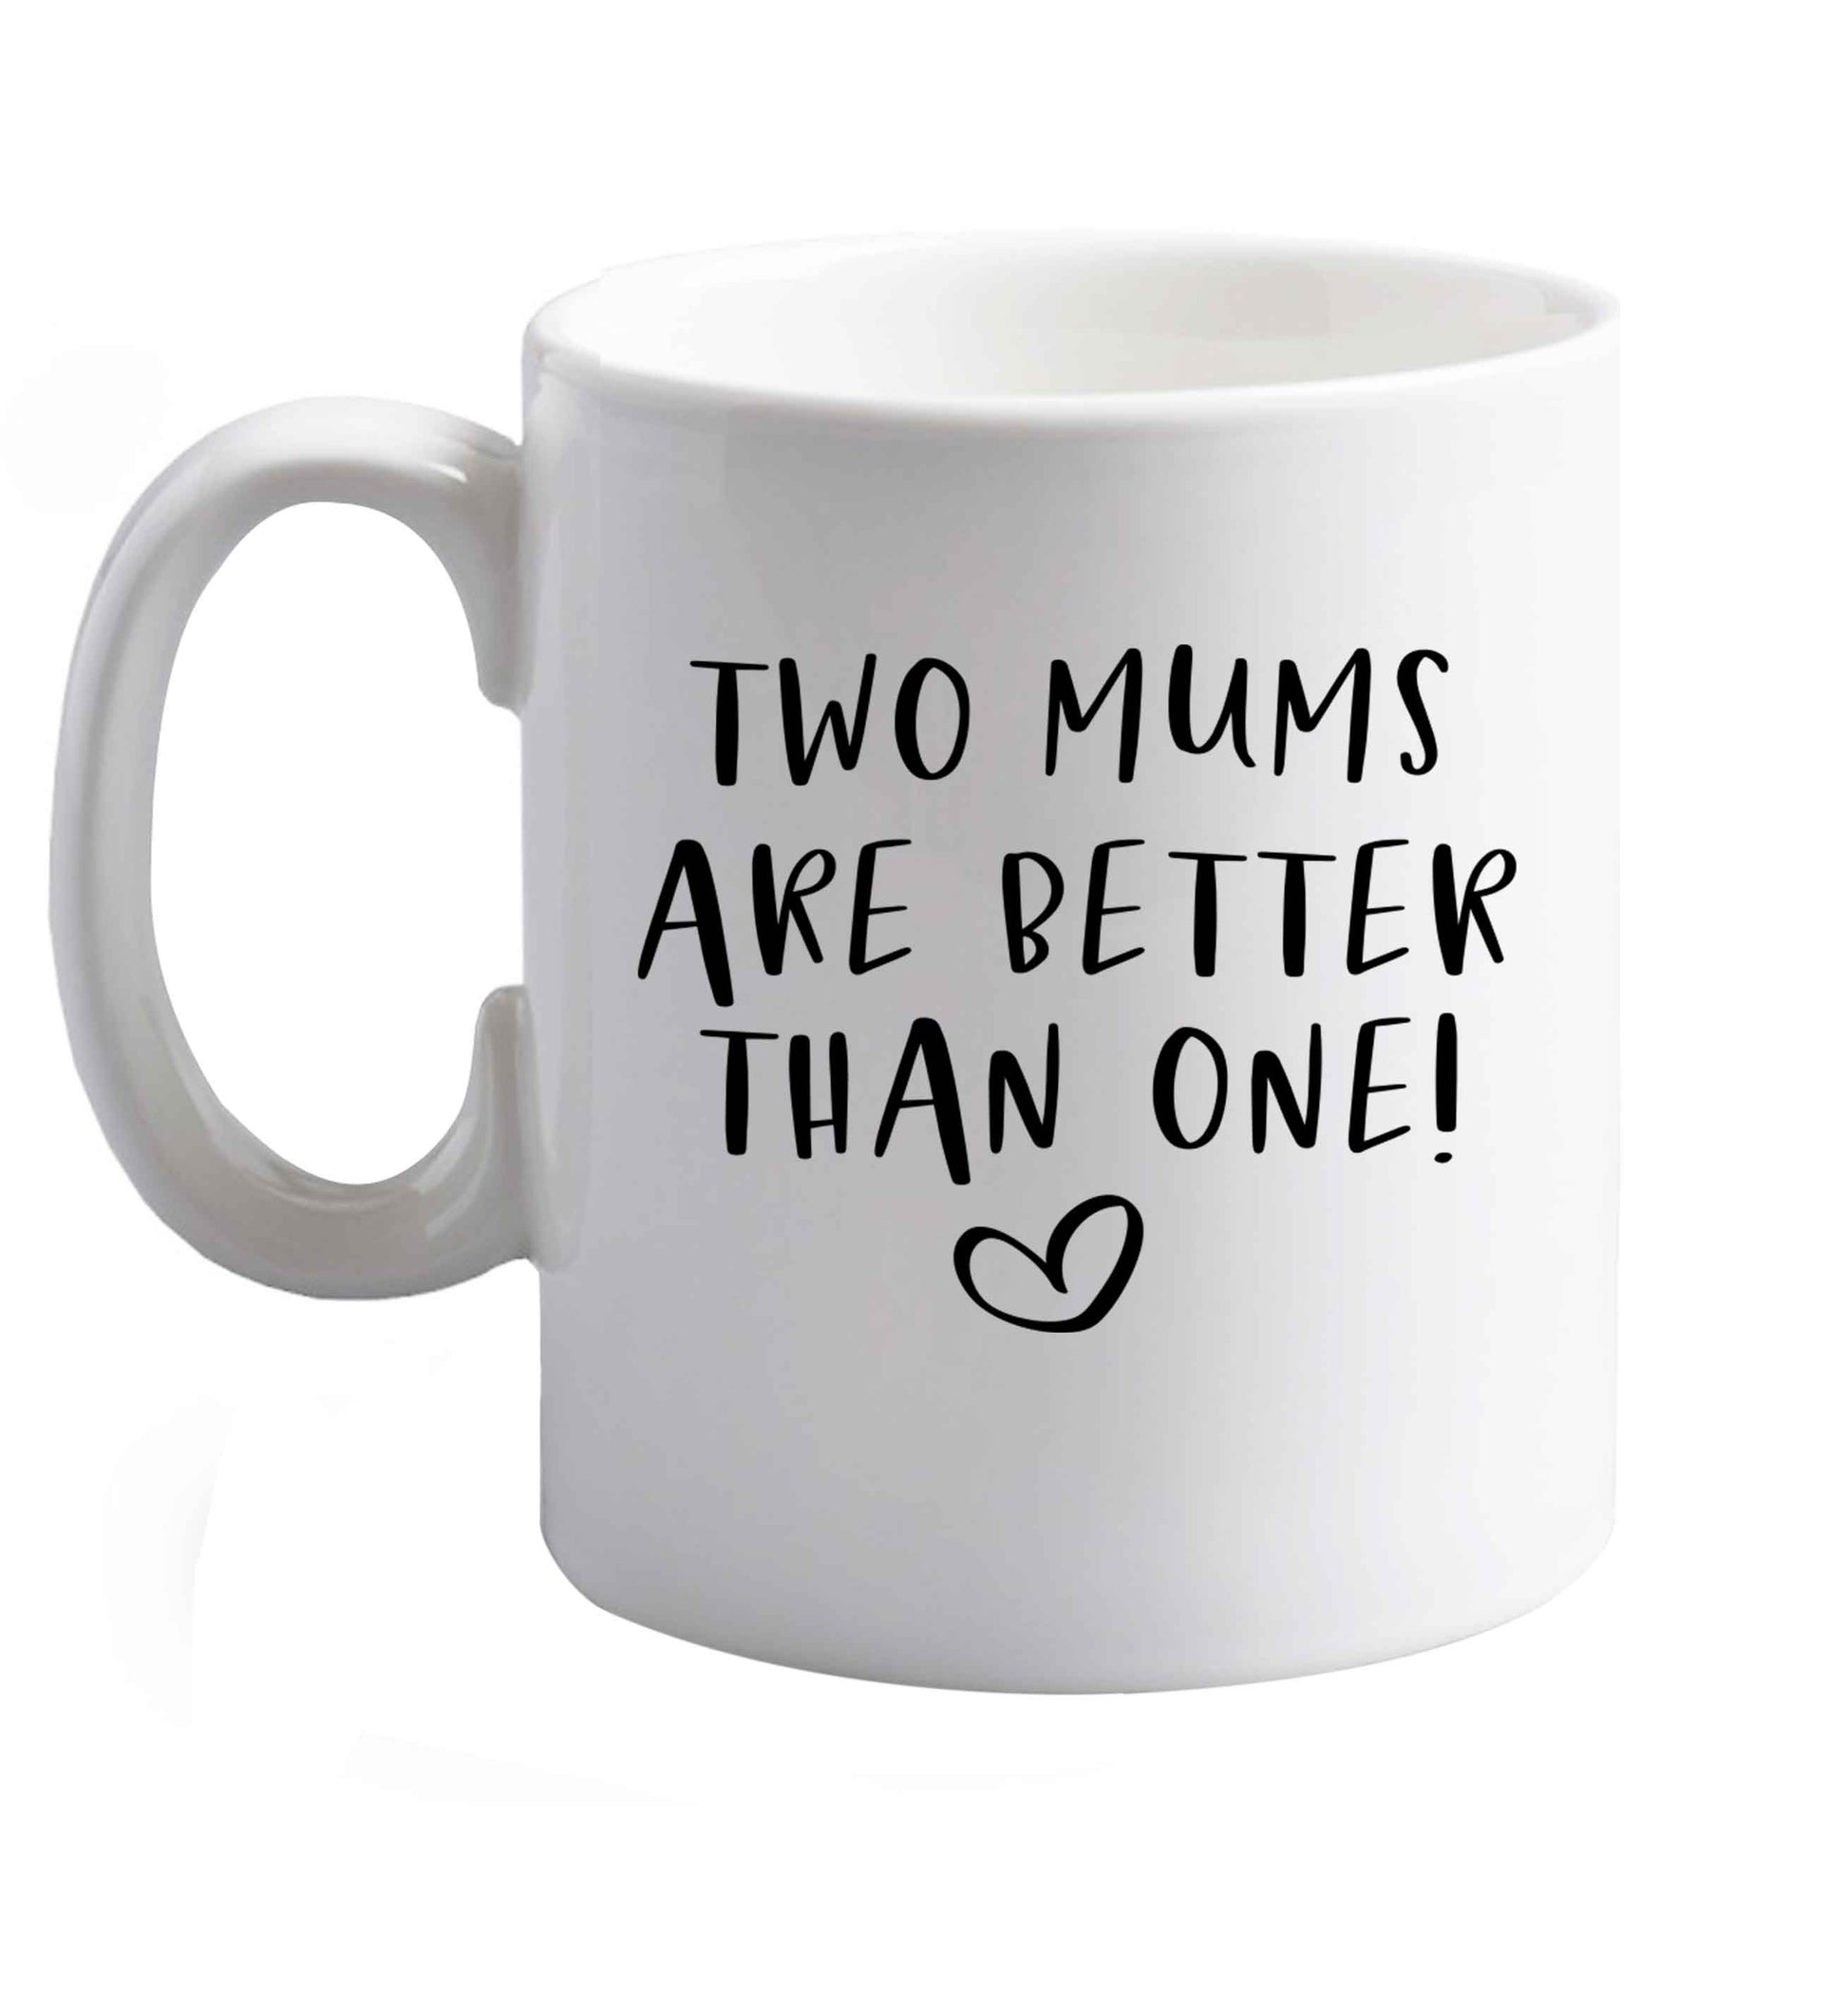 10 oz Two mums are better than one ceramic mug right handed